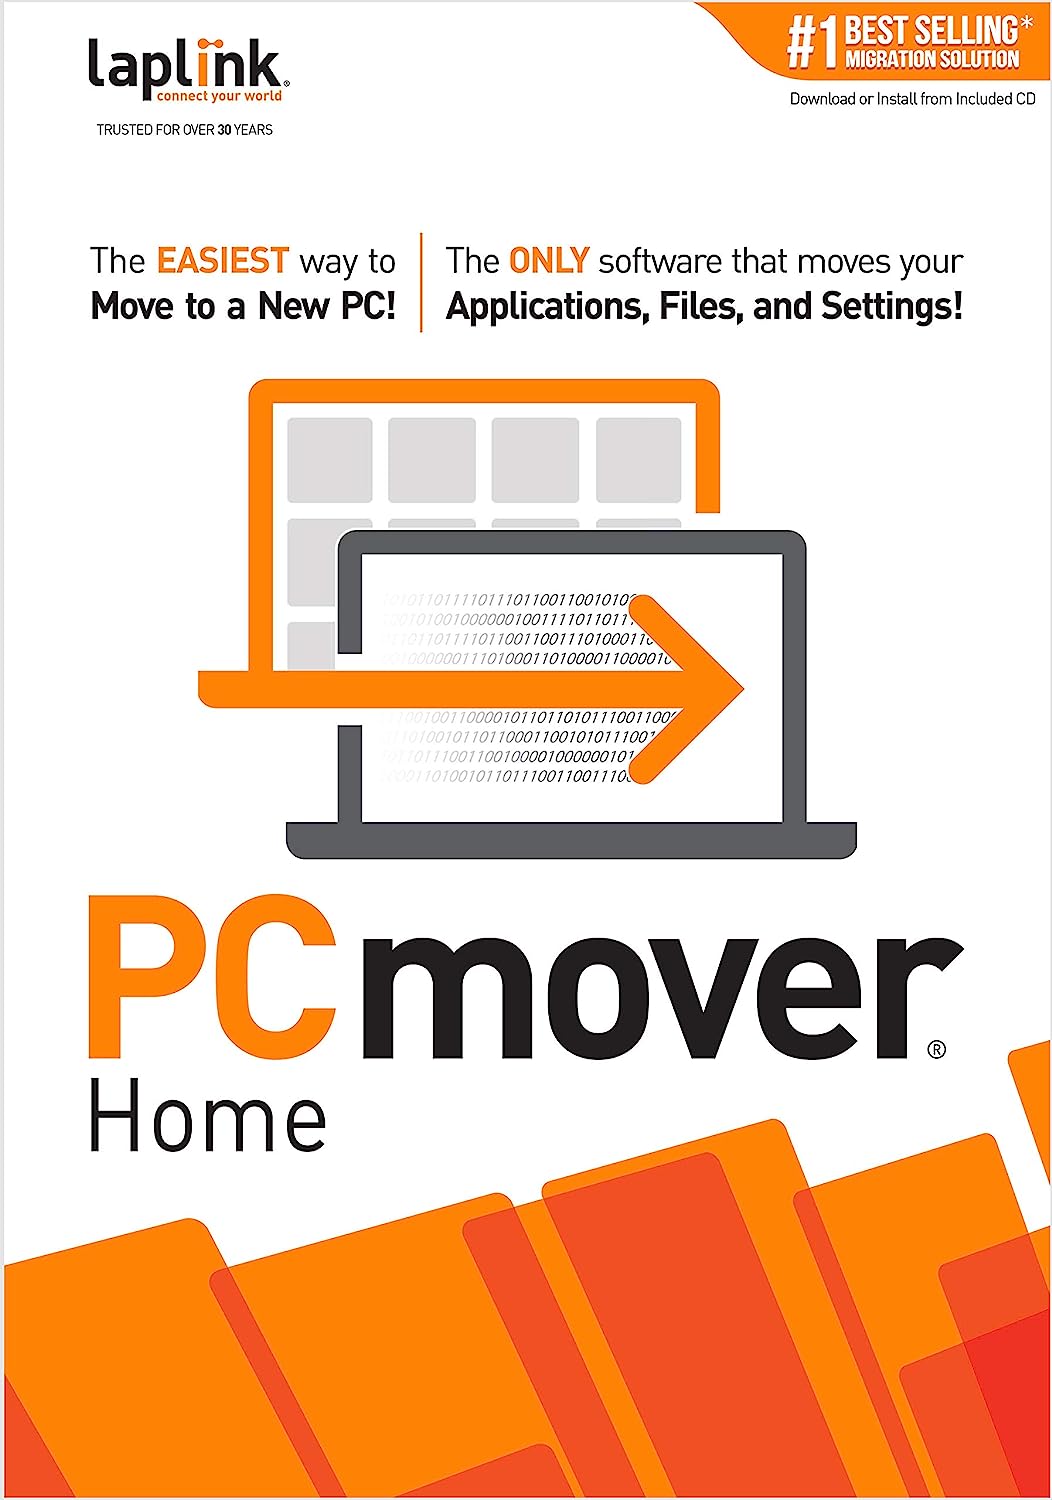 Laplink PCmover Home | Instant Download | Single Use [...]